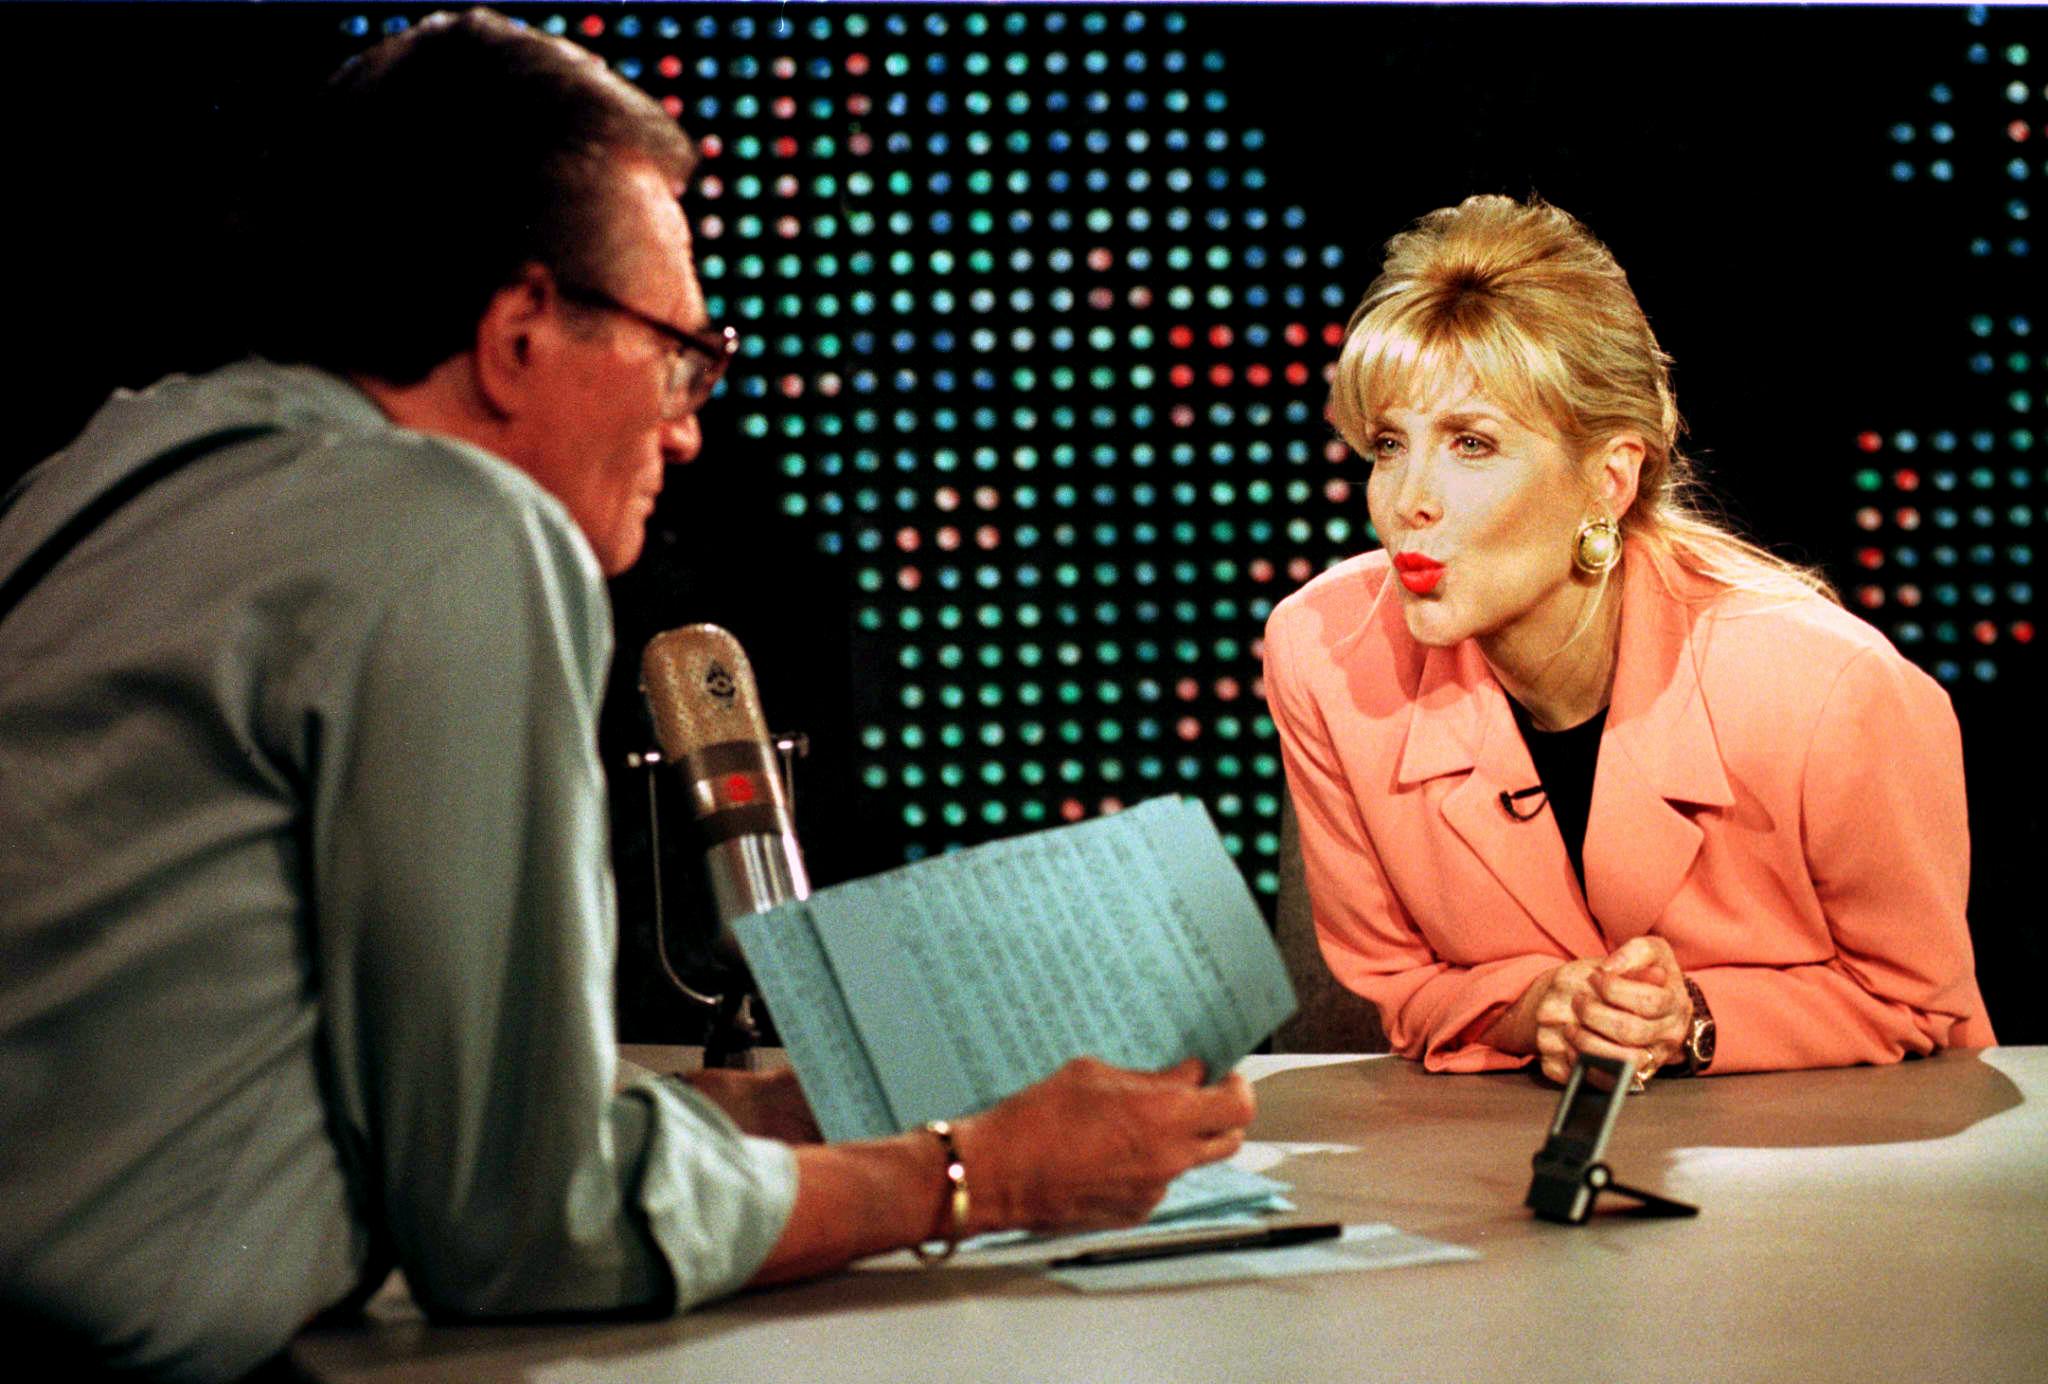 Gennifer Flowers (R) blows a kiss to talk show host Larry King (L) during her live interview on CNN's Larry King Live show in Hollywood, CA.  According to reports leaked to the press, US President Bill Clinton admitted during a deposition in the Paula Jones investigation to having an affair with Flowers while he was governor of Arkansas.   RENE MACURA/AFP--Getty Images) (RENE MACURA&mdash;AFP/Getty Images)